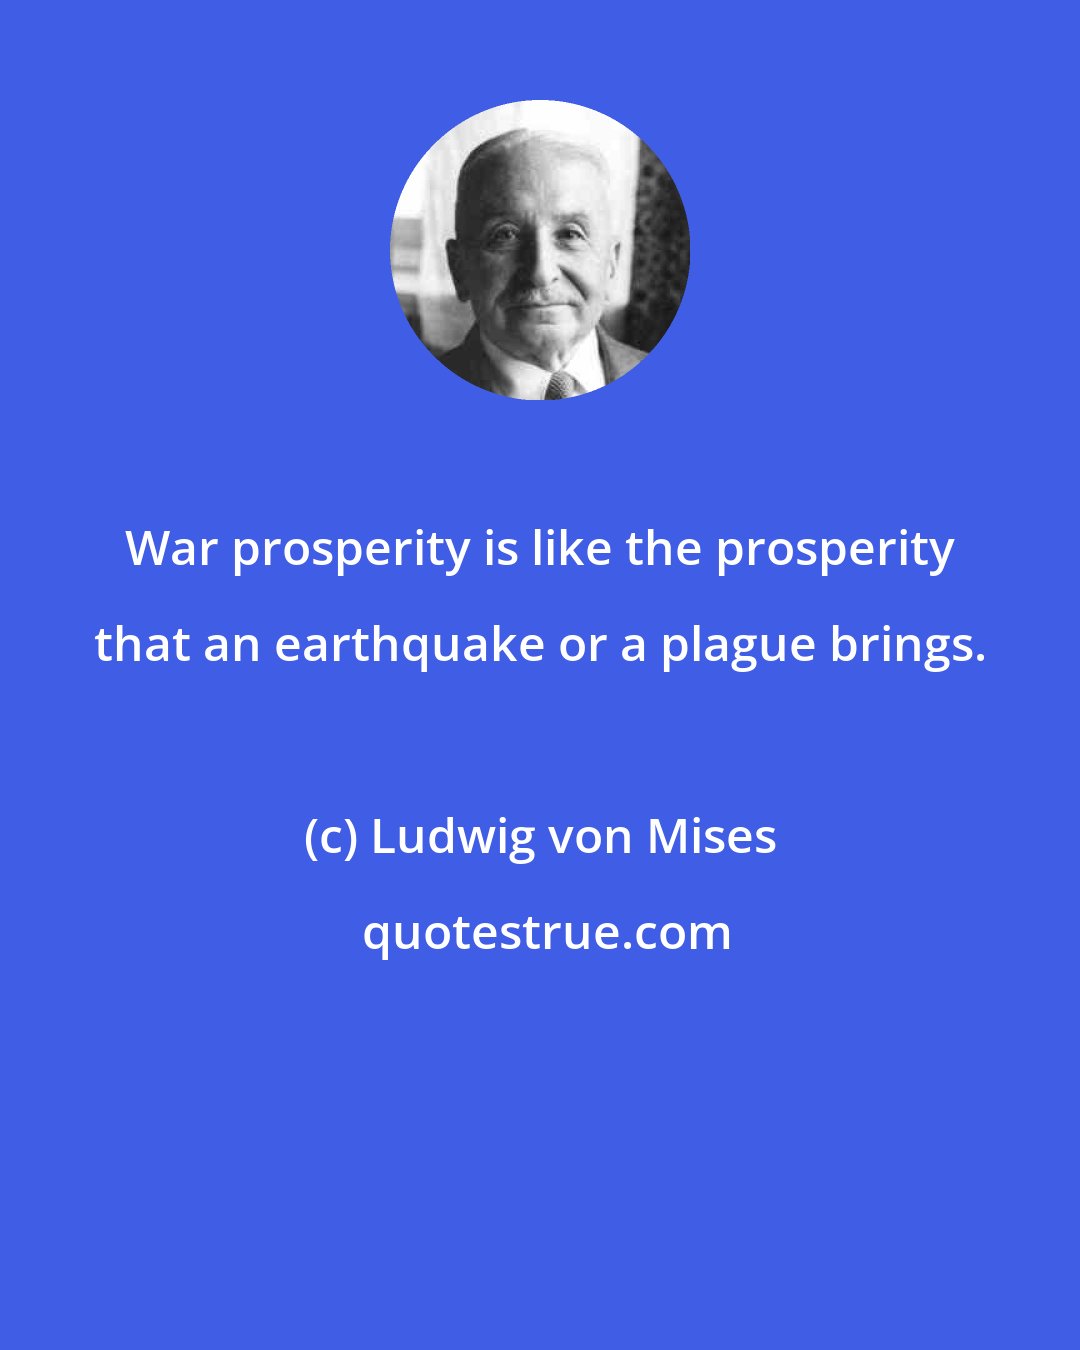 Ludwig von Mises: War prosperity is like the prosperity that an earthquake or a plague brings.